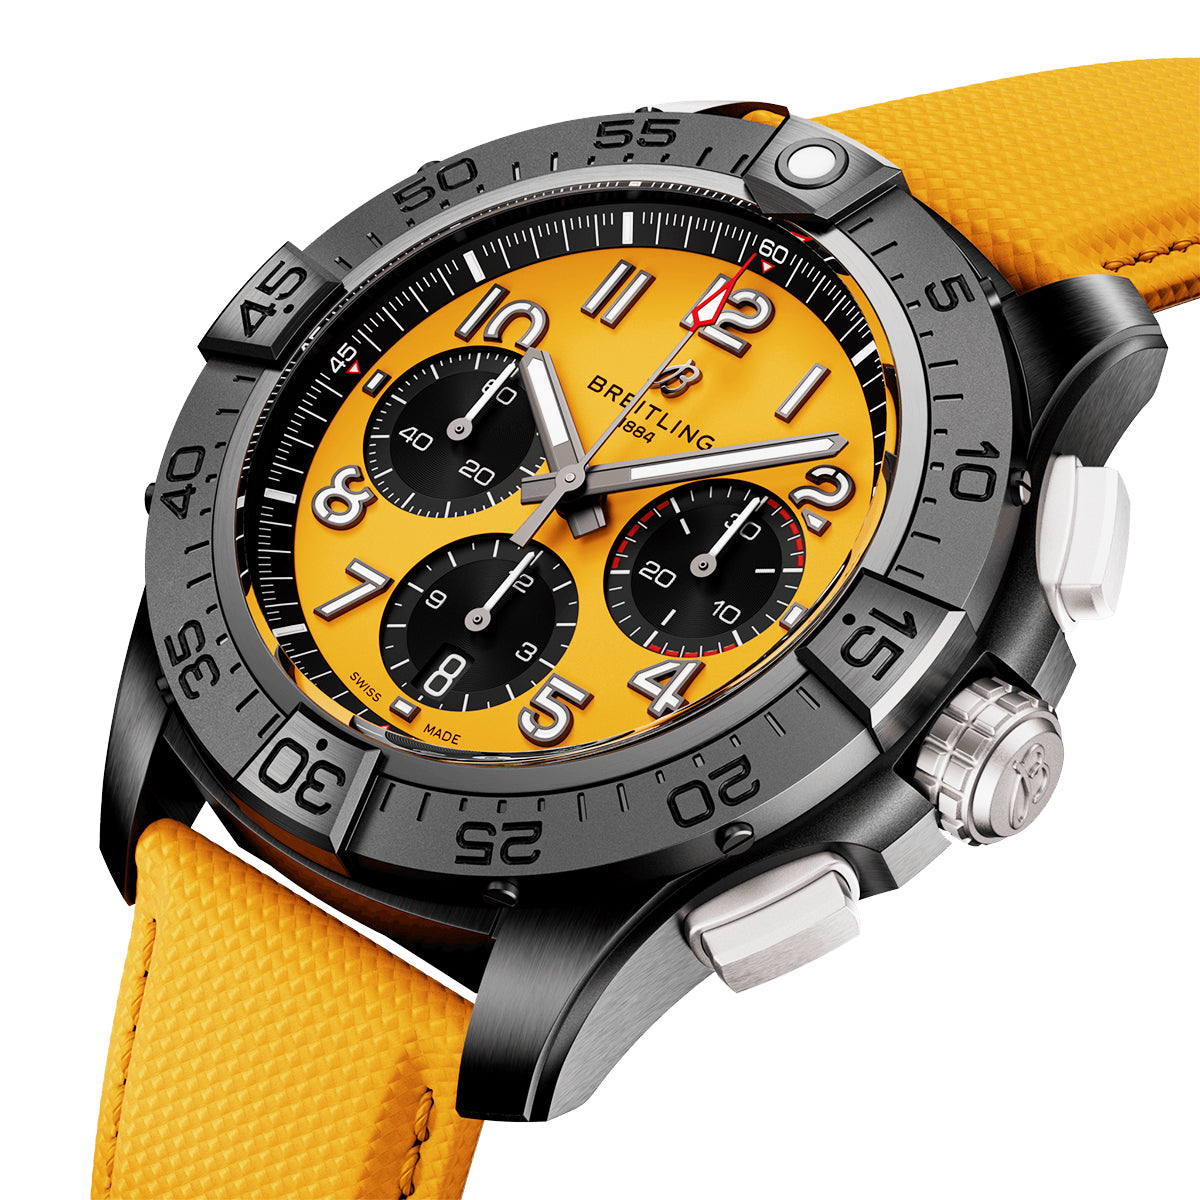 Avenger Night Mission 44mm Black Ceramic & Yellow Dial Watch